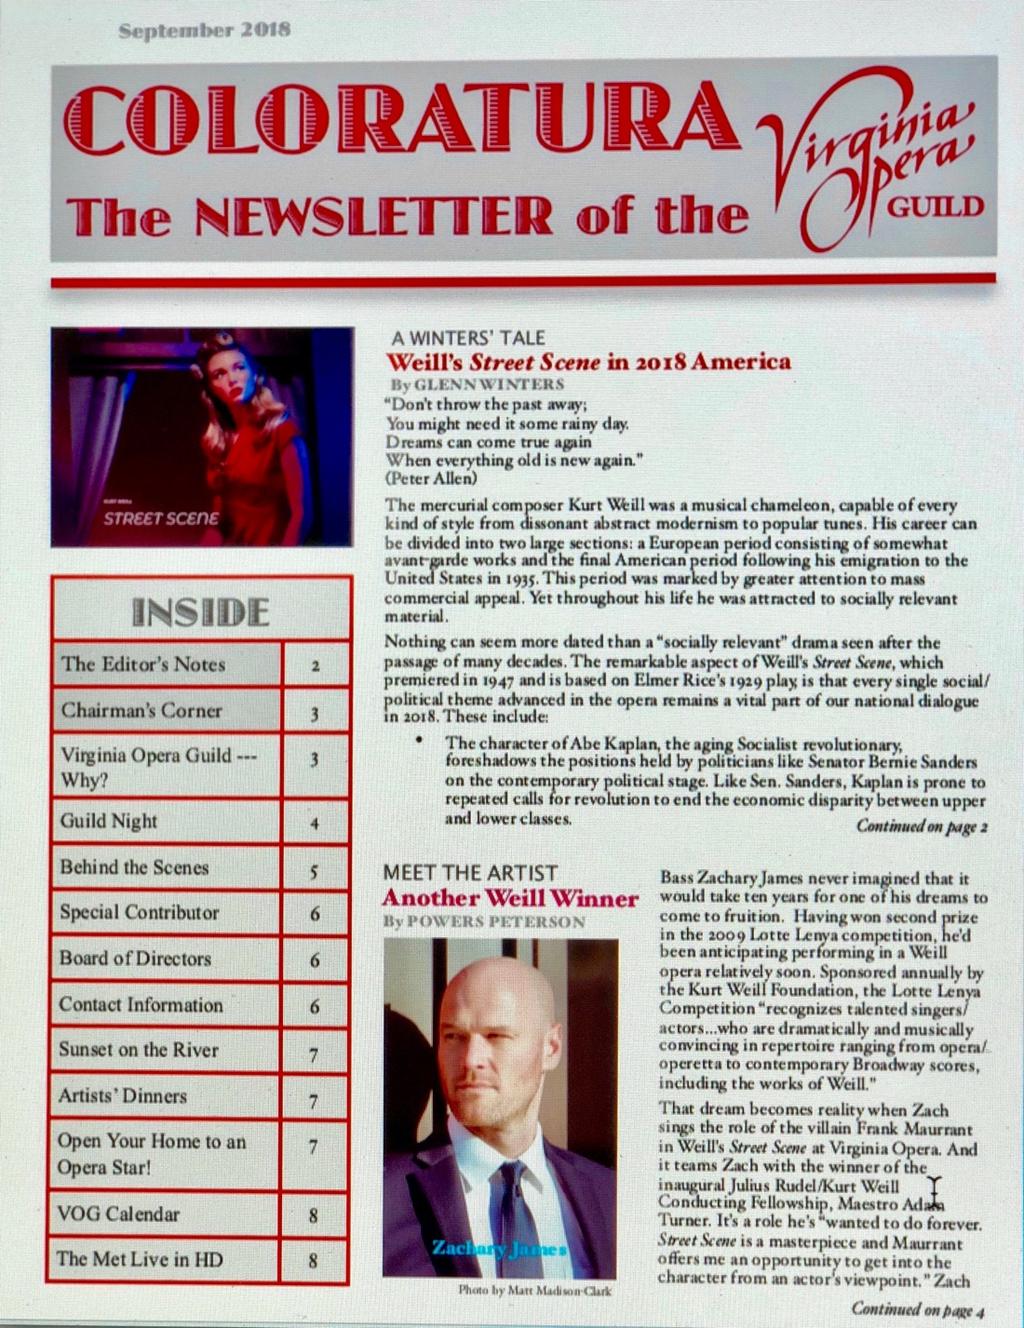 Even Coloratura has grown from an internal Guild document to a widely distributed newsletter for opera lovers throughout the area. Every Guild activity has an educational function.